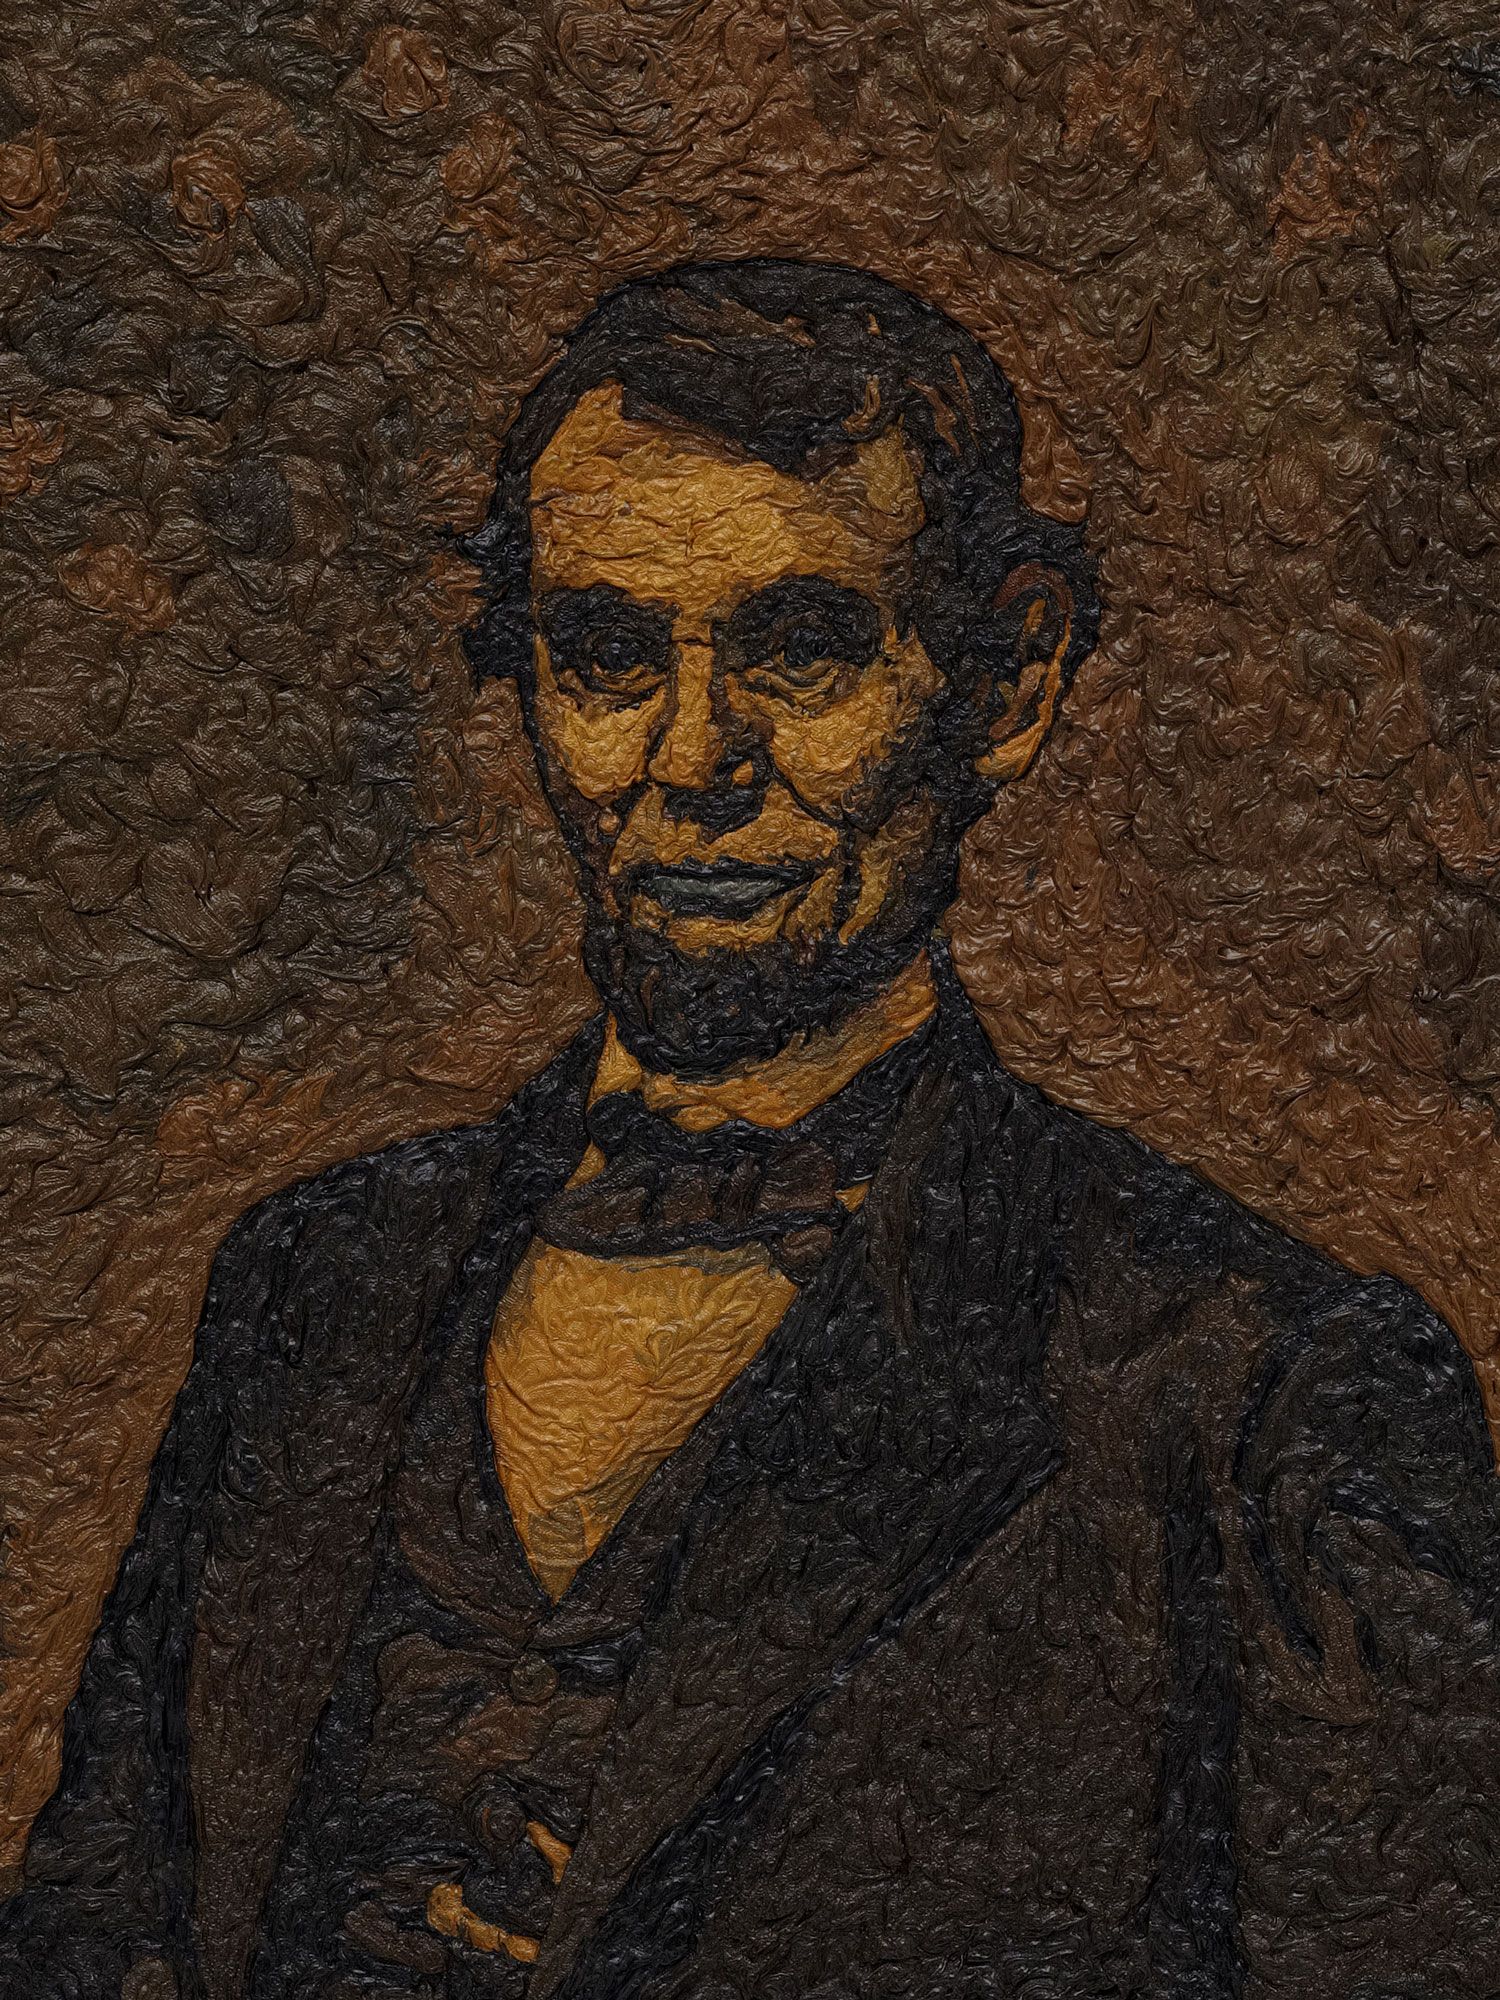 Brown and yellow painting of Abraham Lincoln.